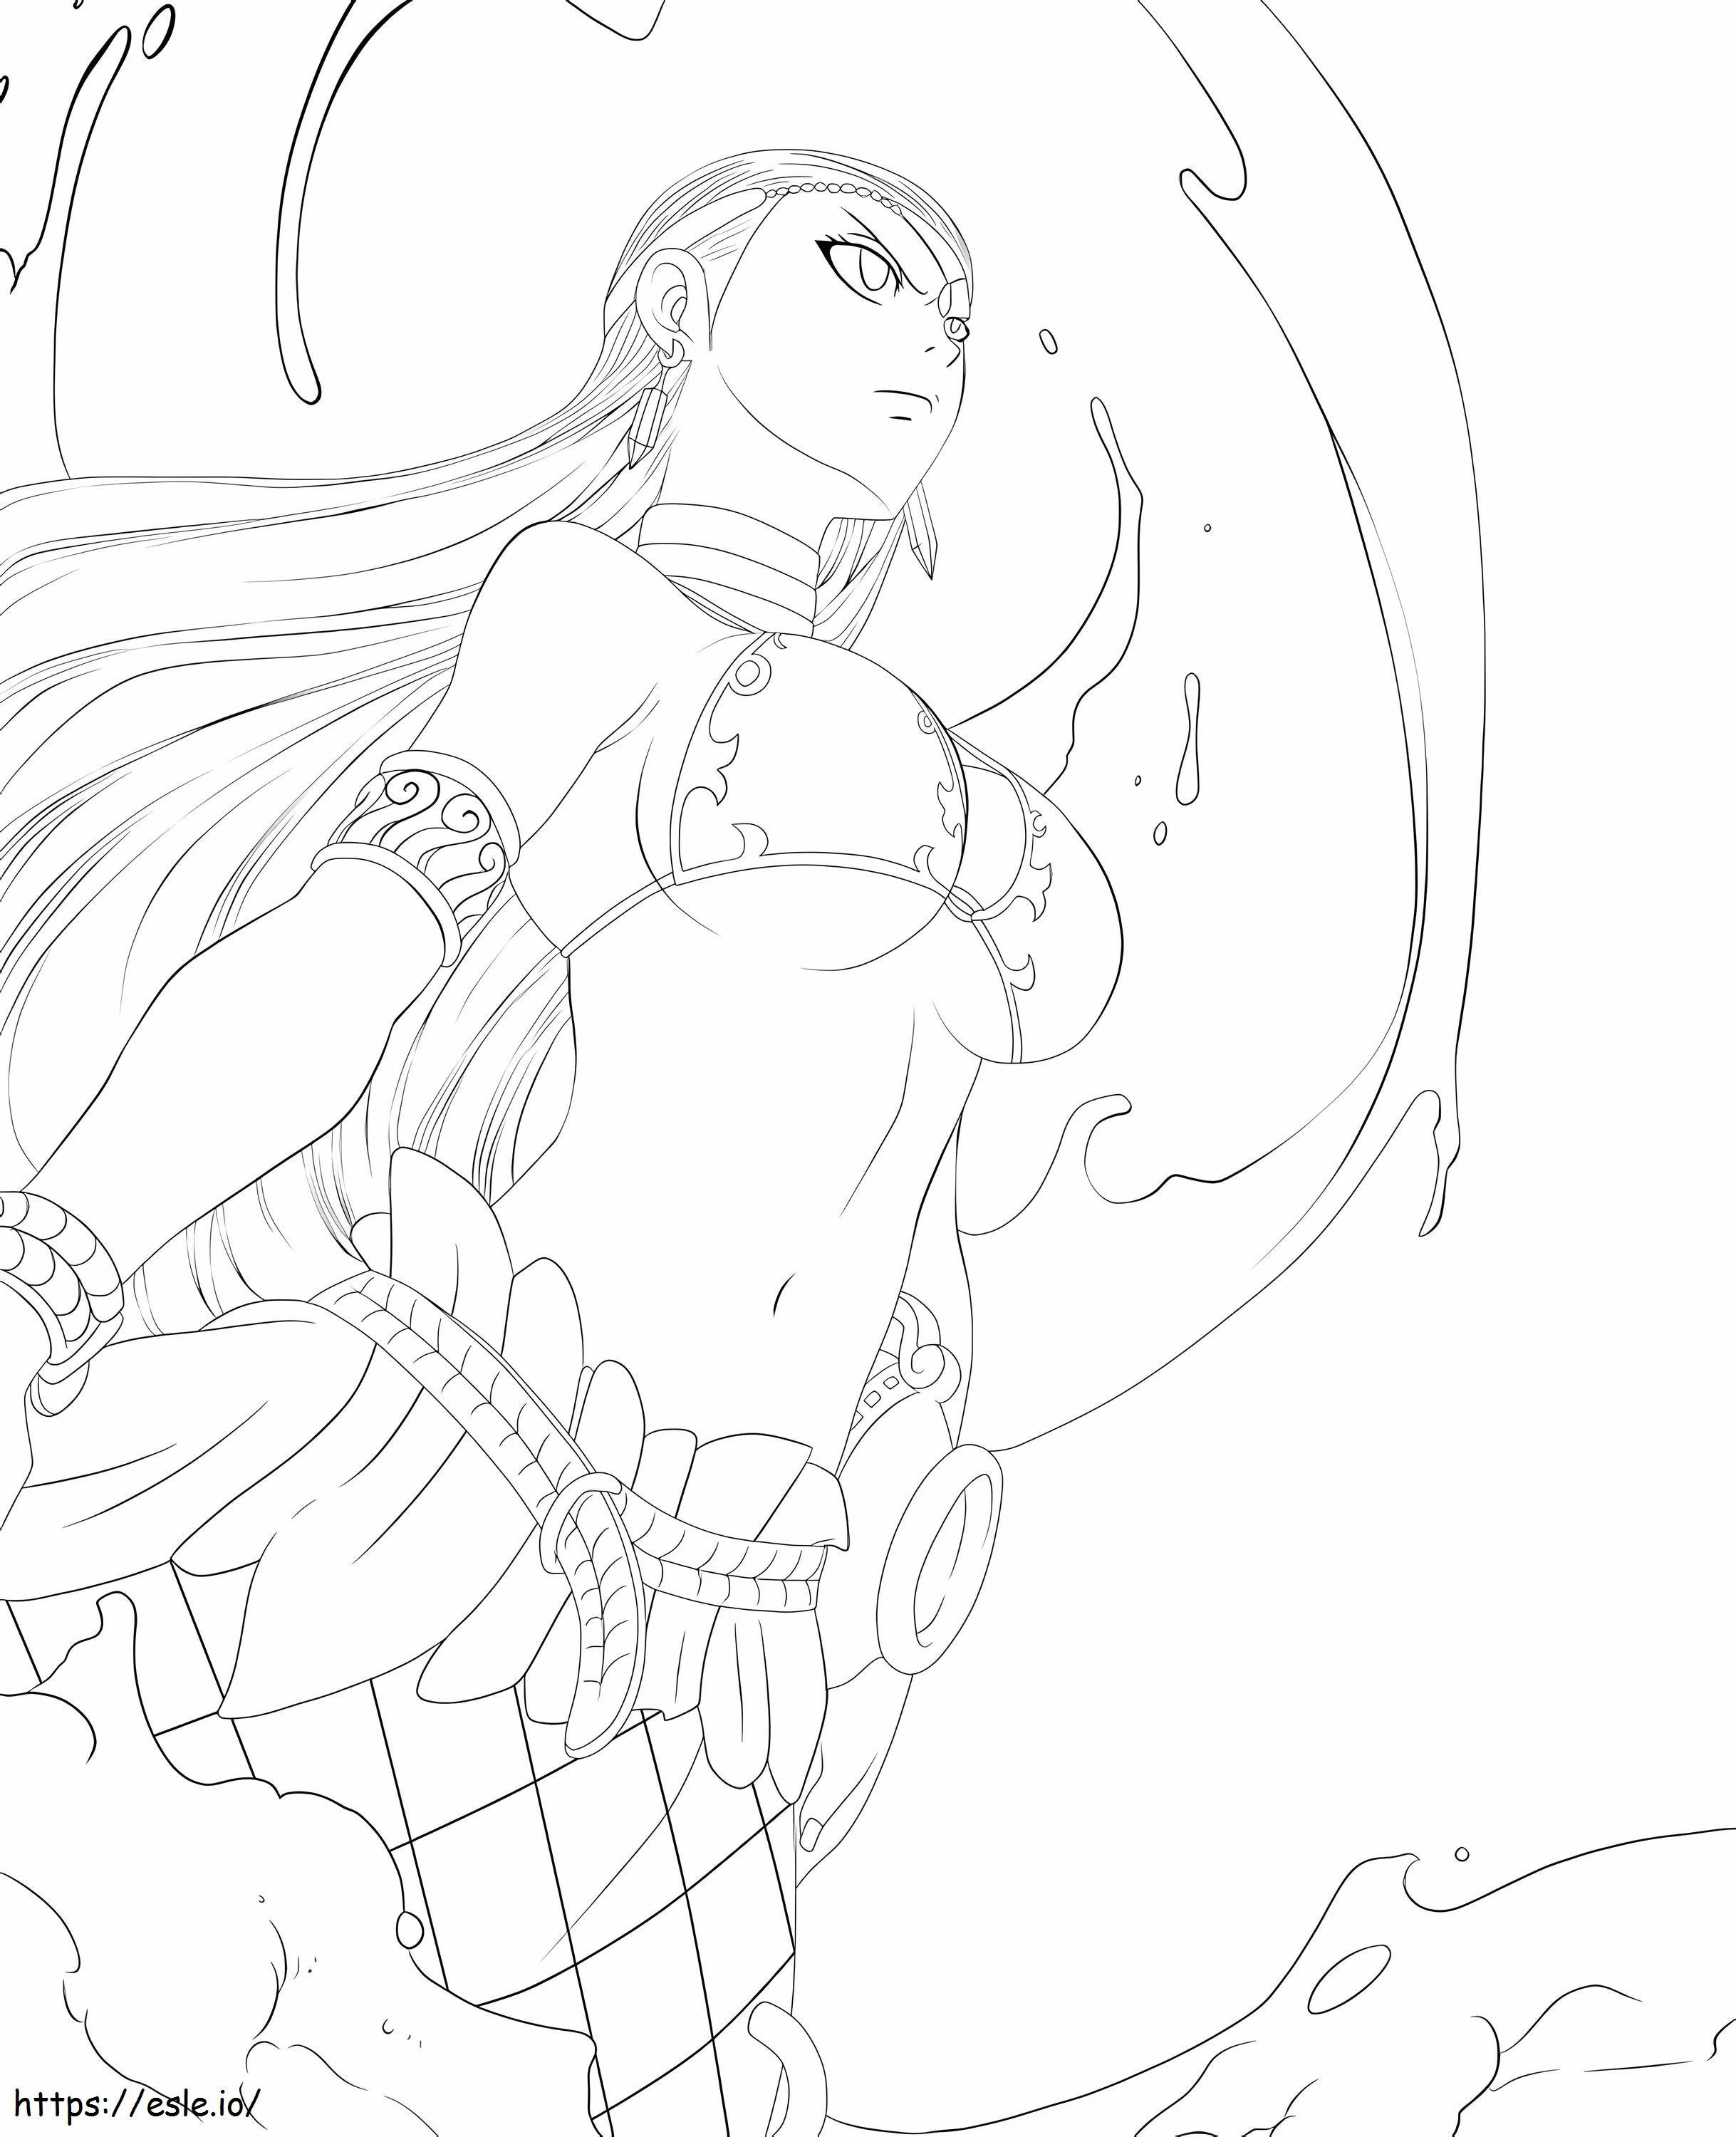 Aquarius Fighting A4 coloring page